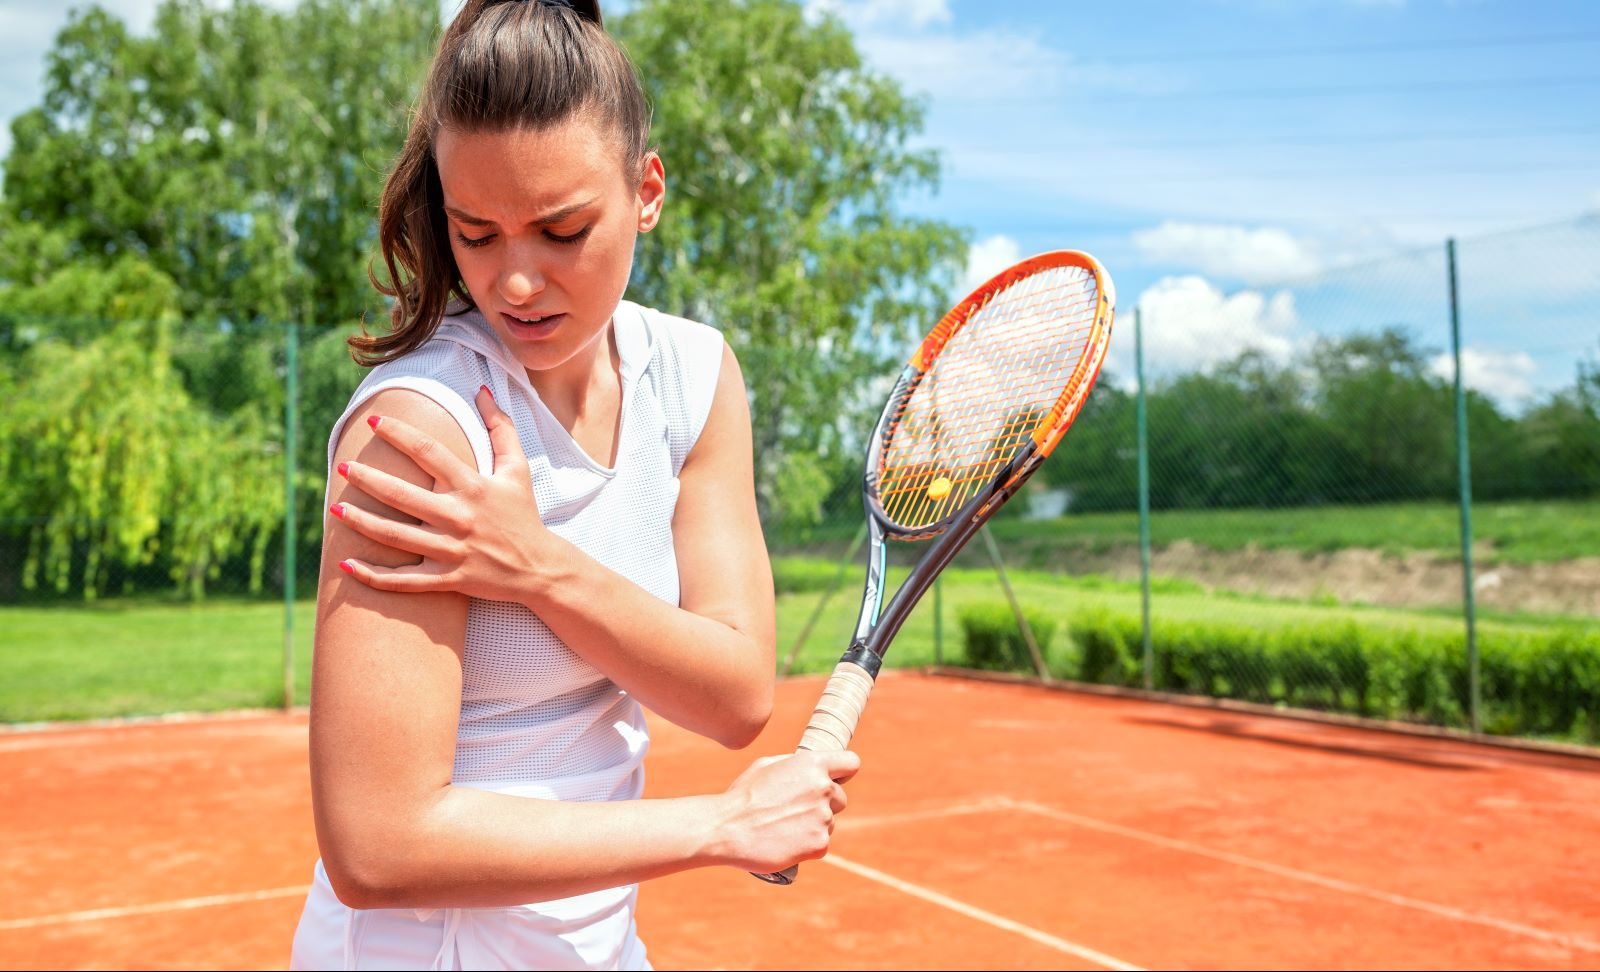 Common sports injuries in the summer often result from tennis or golf.